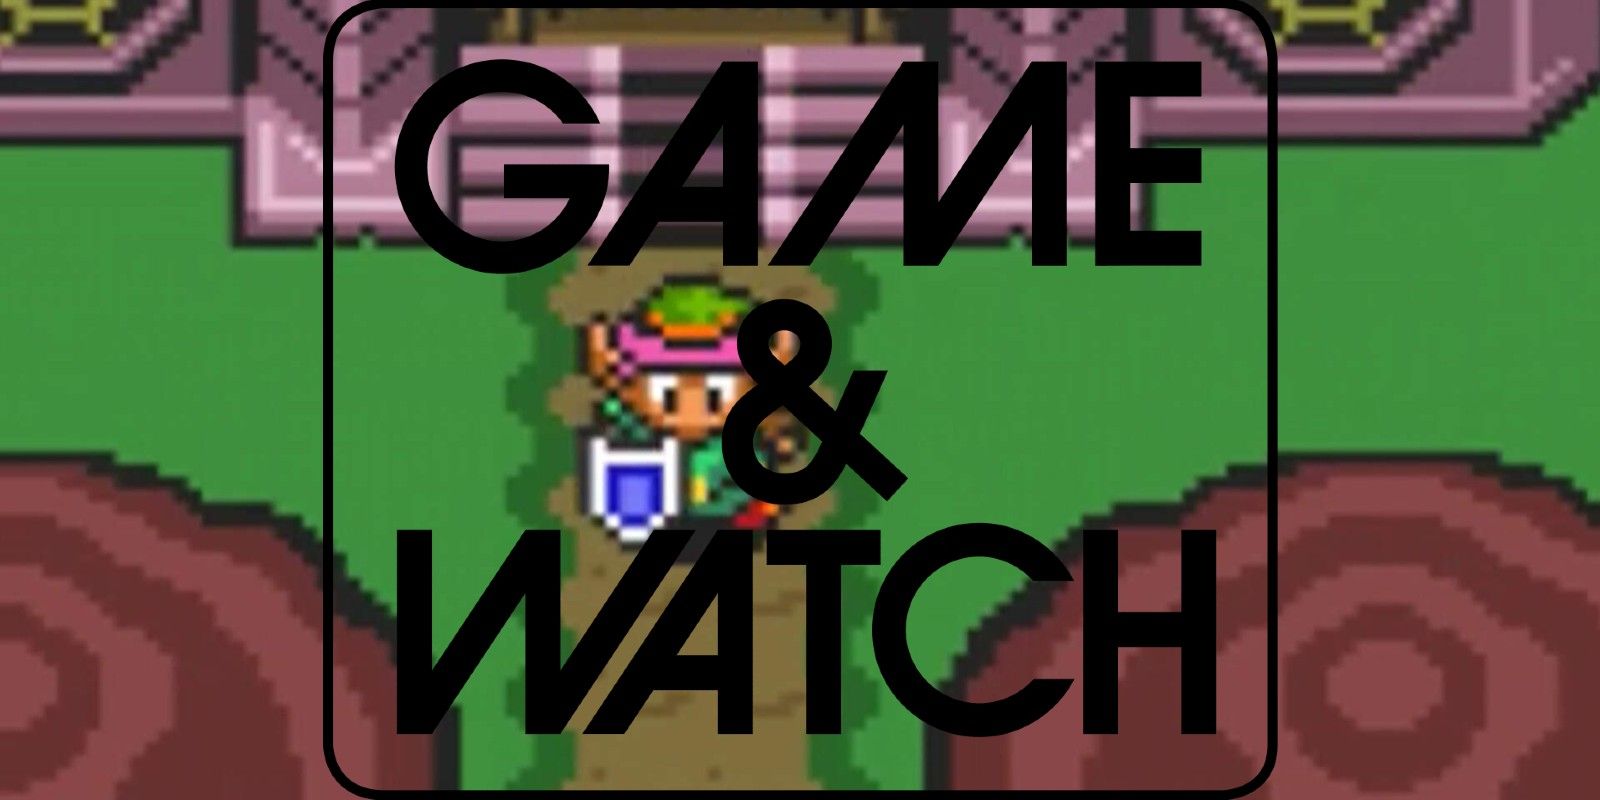 The Legend of Zelda has plenty of titles that could be given the Game And Watch treatment, including A Link To The Past